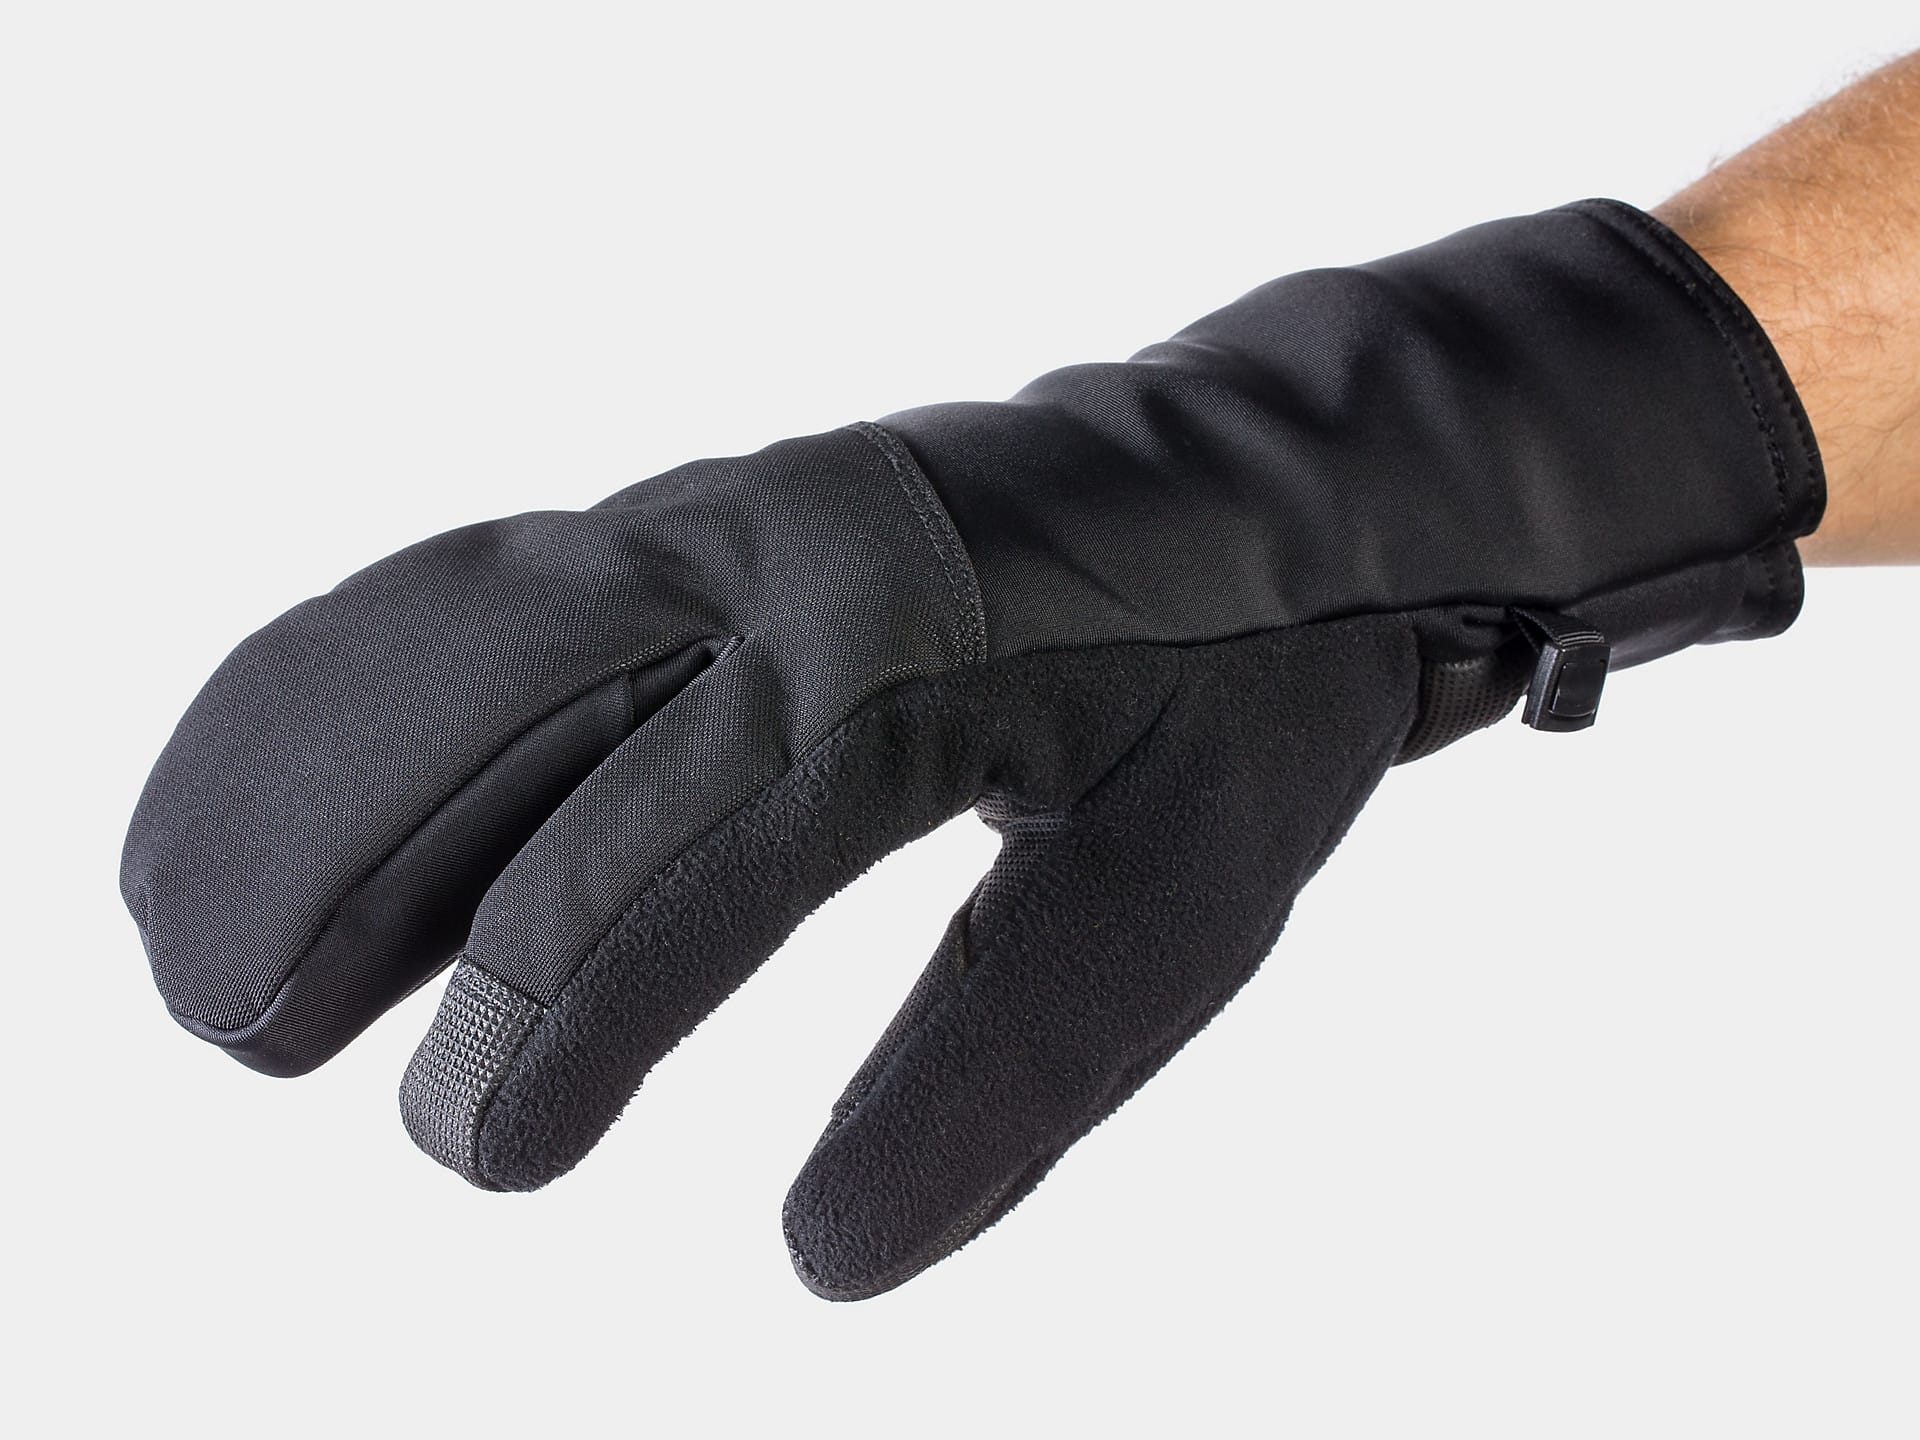 VelocisWinterSplitFingerCyclingGlove_24719_A_Primary